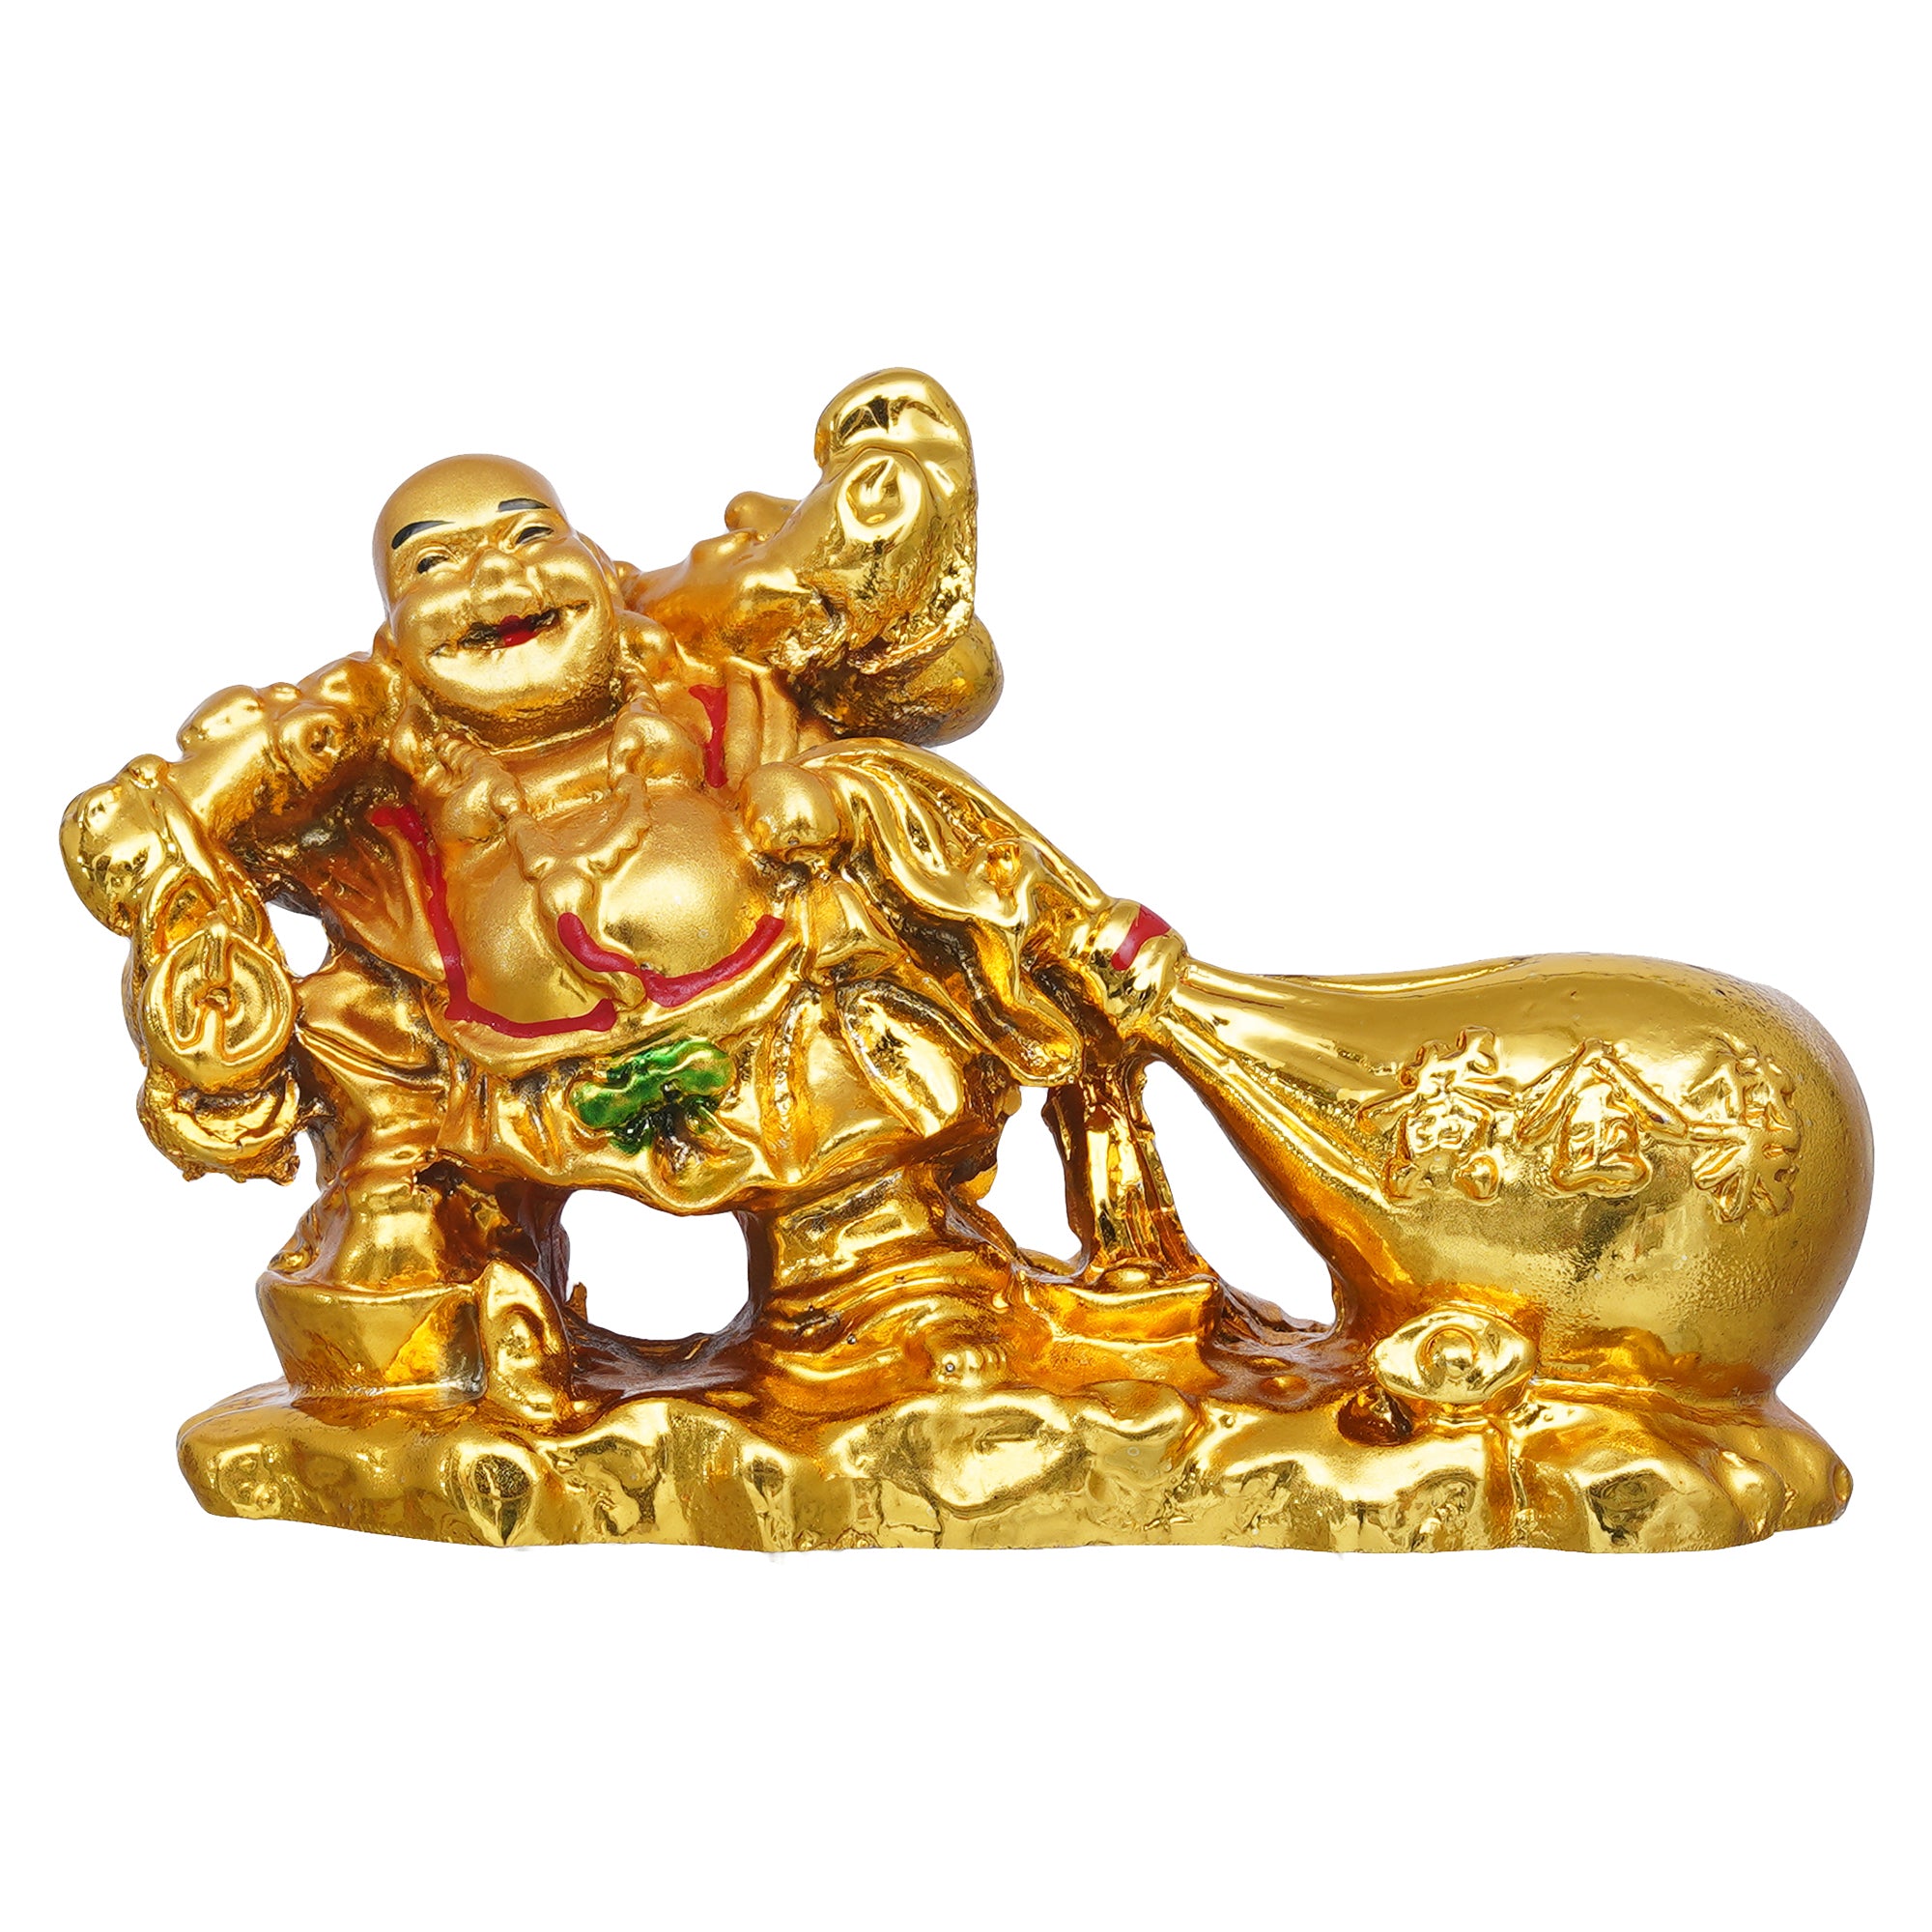 eCraftIndia Golden Polyresin Feng Shui Laughing Buddha Idol with Money Bag For Wealth And Good Luck 2